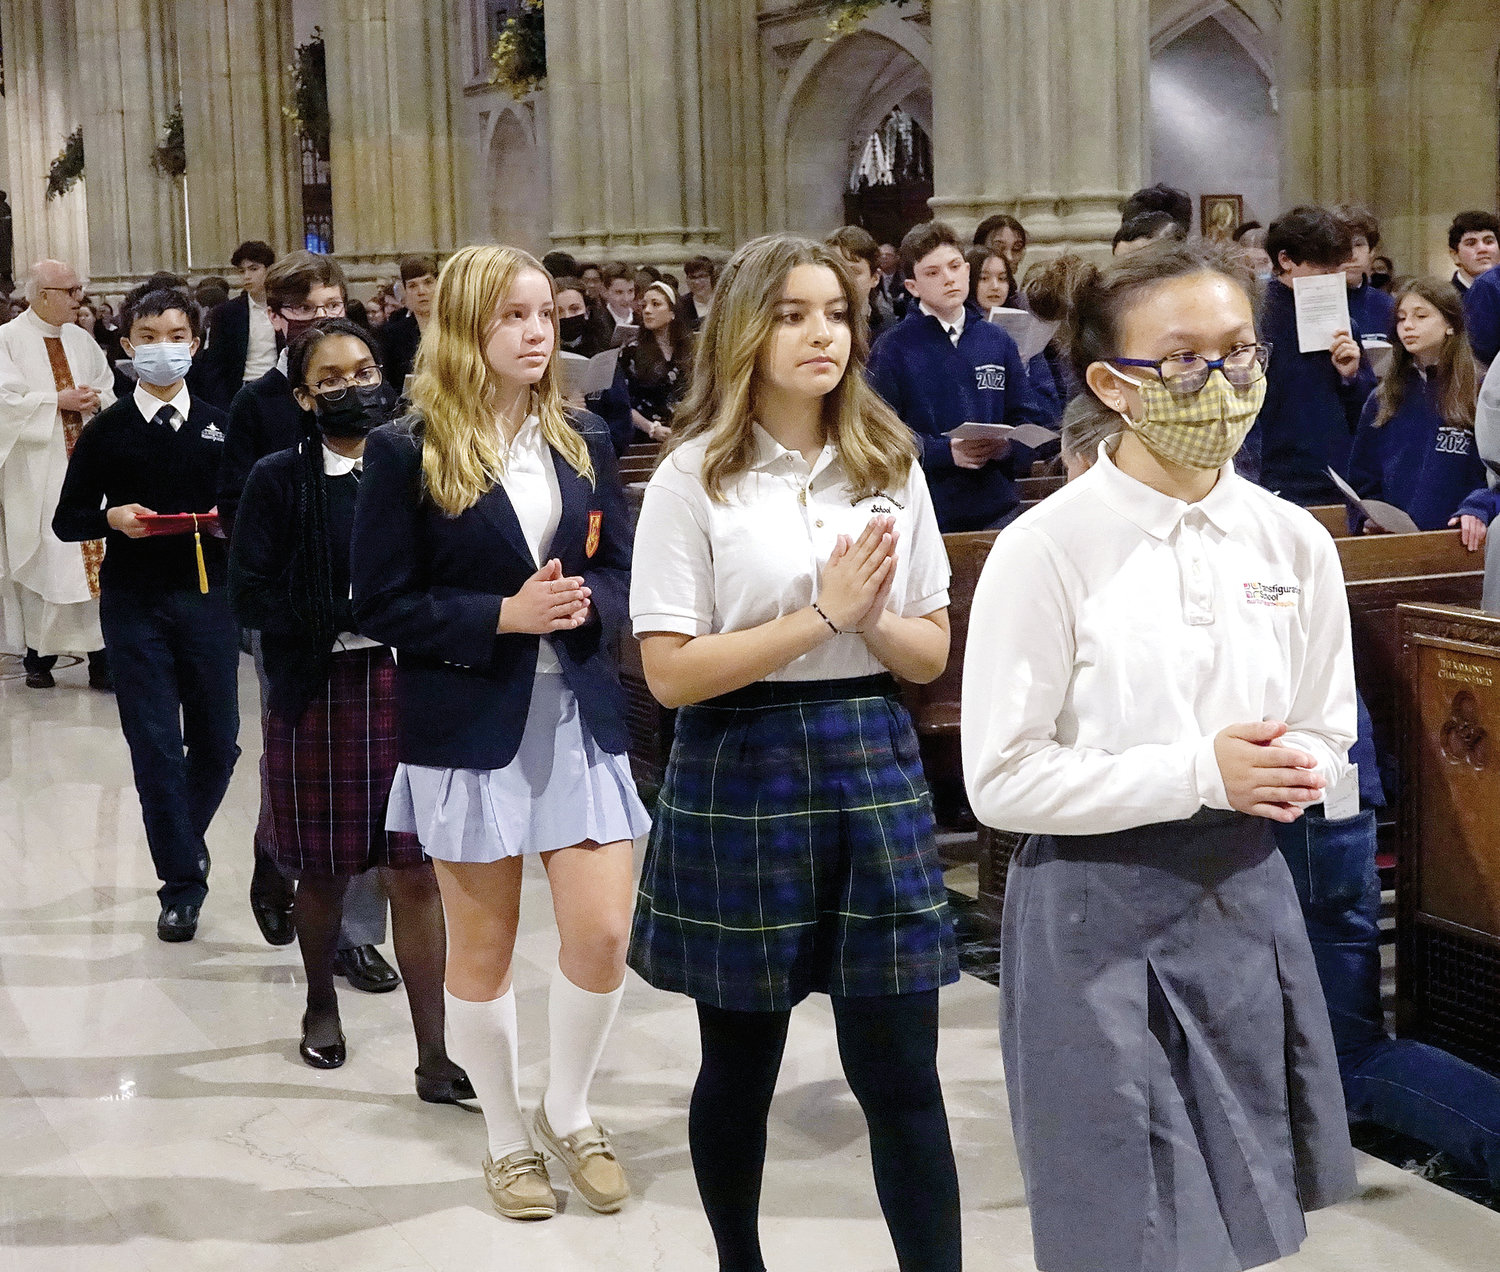 Students lead the opening procession May 6 at the Eighth-Grade Graduation Mass for Manhattan Region Catholic Schools in St. Patrick’s Cathedral.